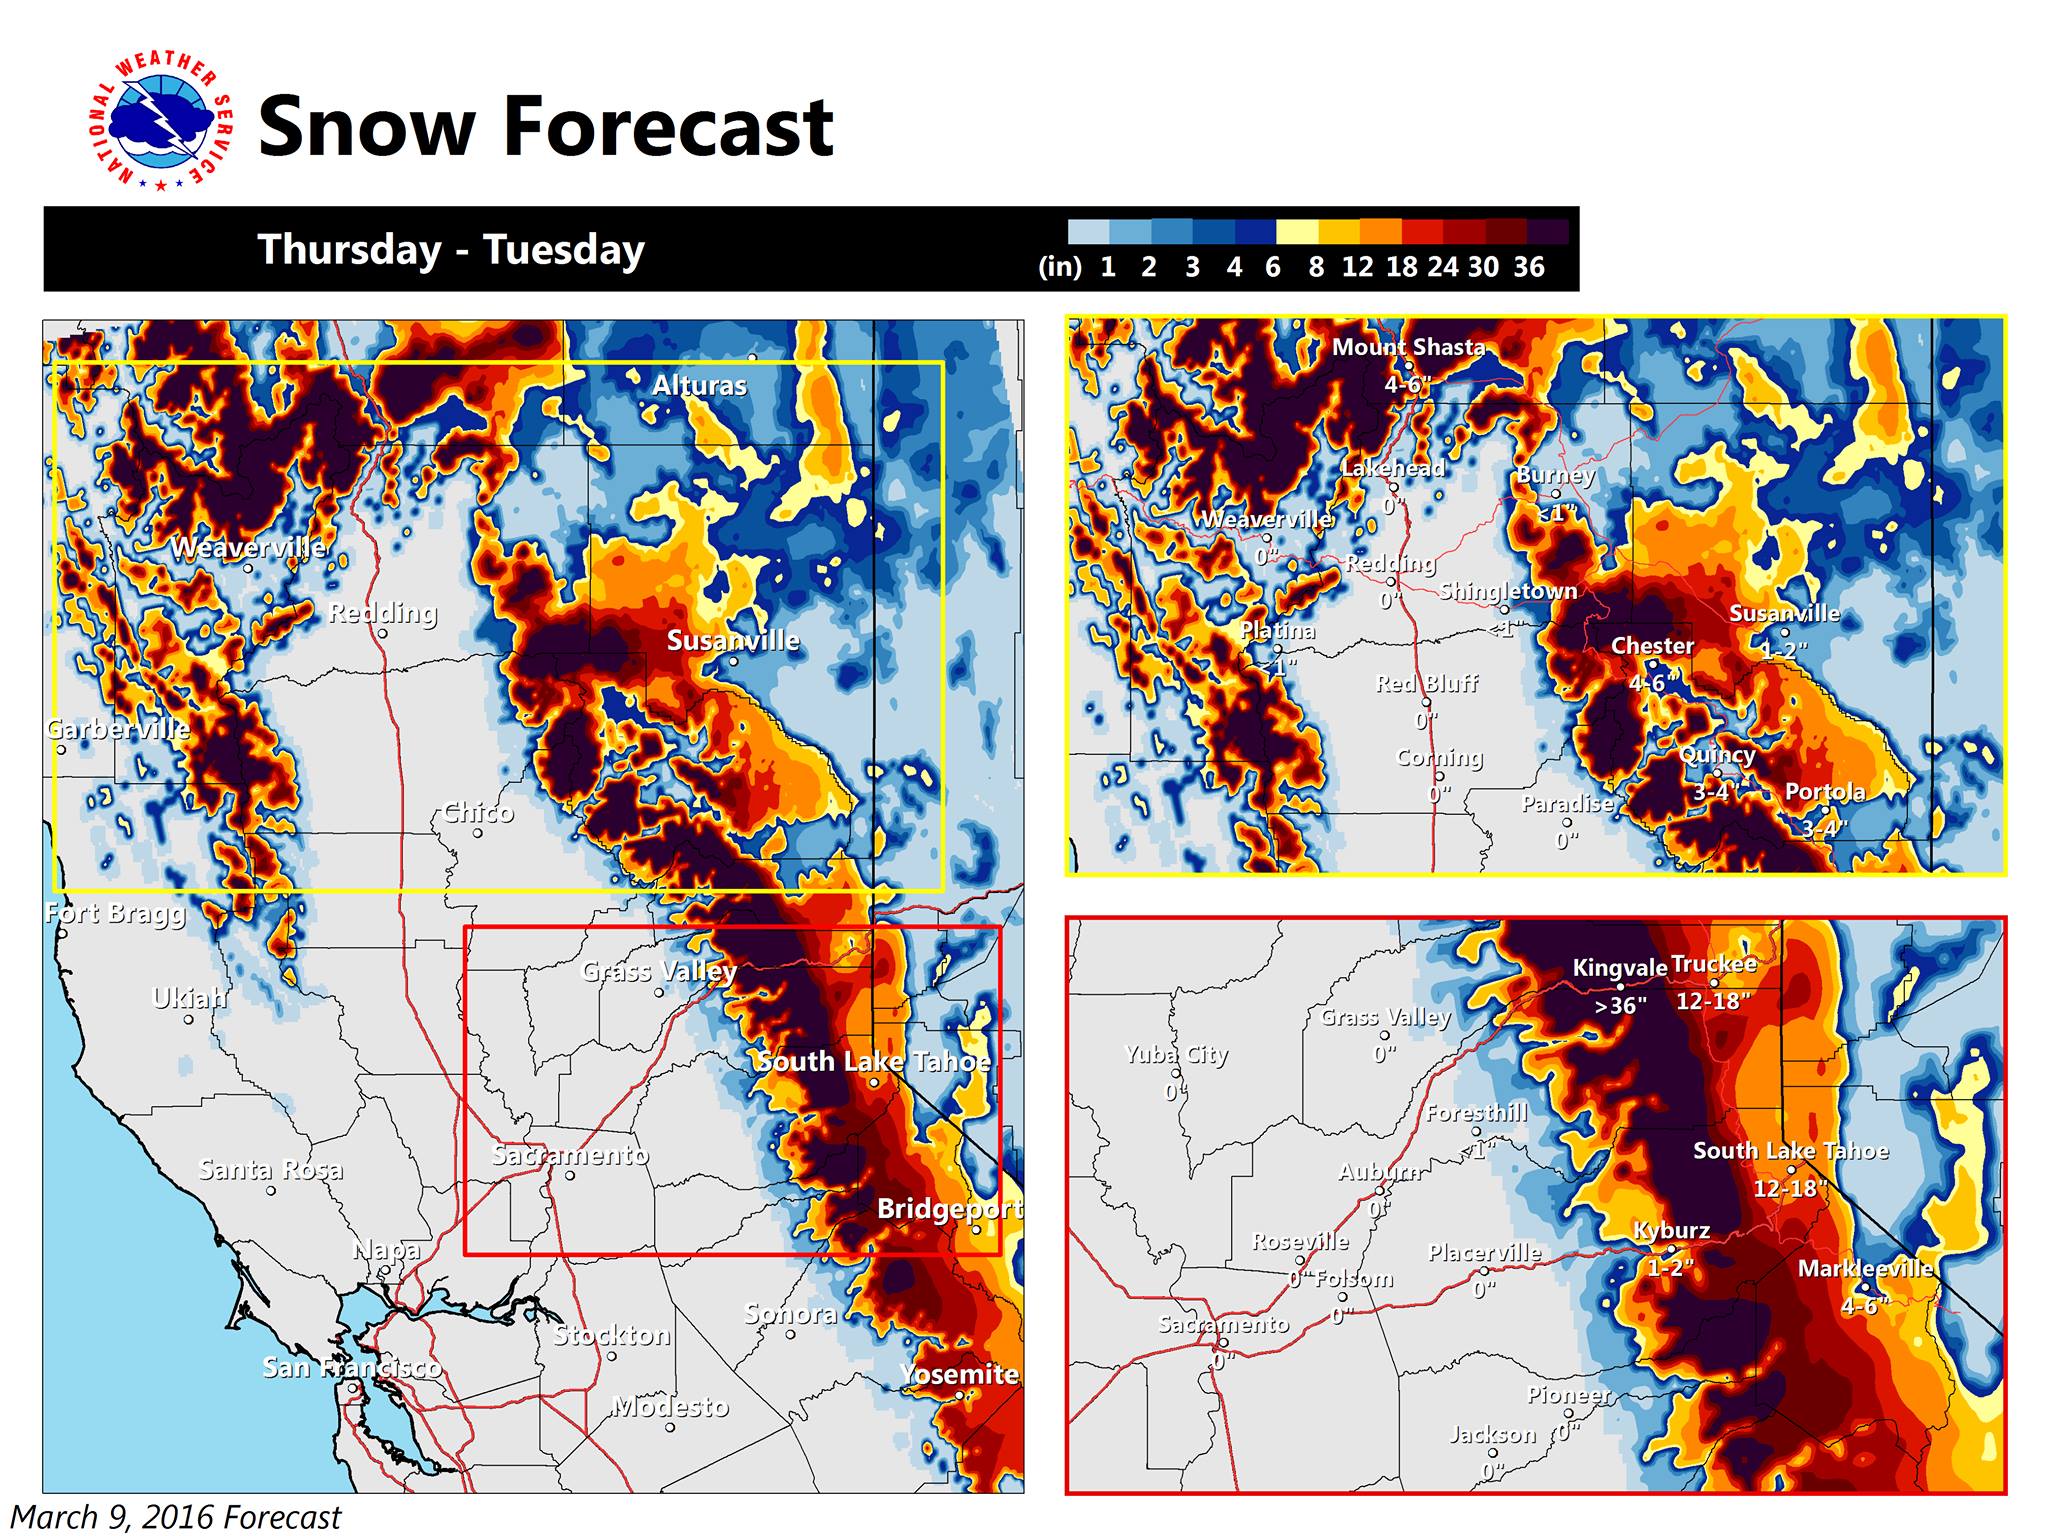 "Mountain snow will pile up this weekend into early next week! 1 to 3 feet is possible above 5000 feet with up to 5 feet along higher peaks! " - NOAA Sacramento, CA yesterday